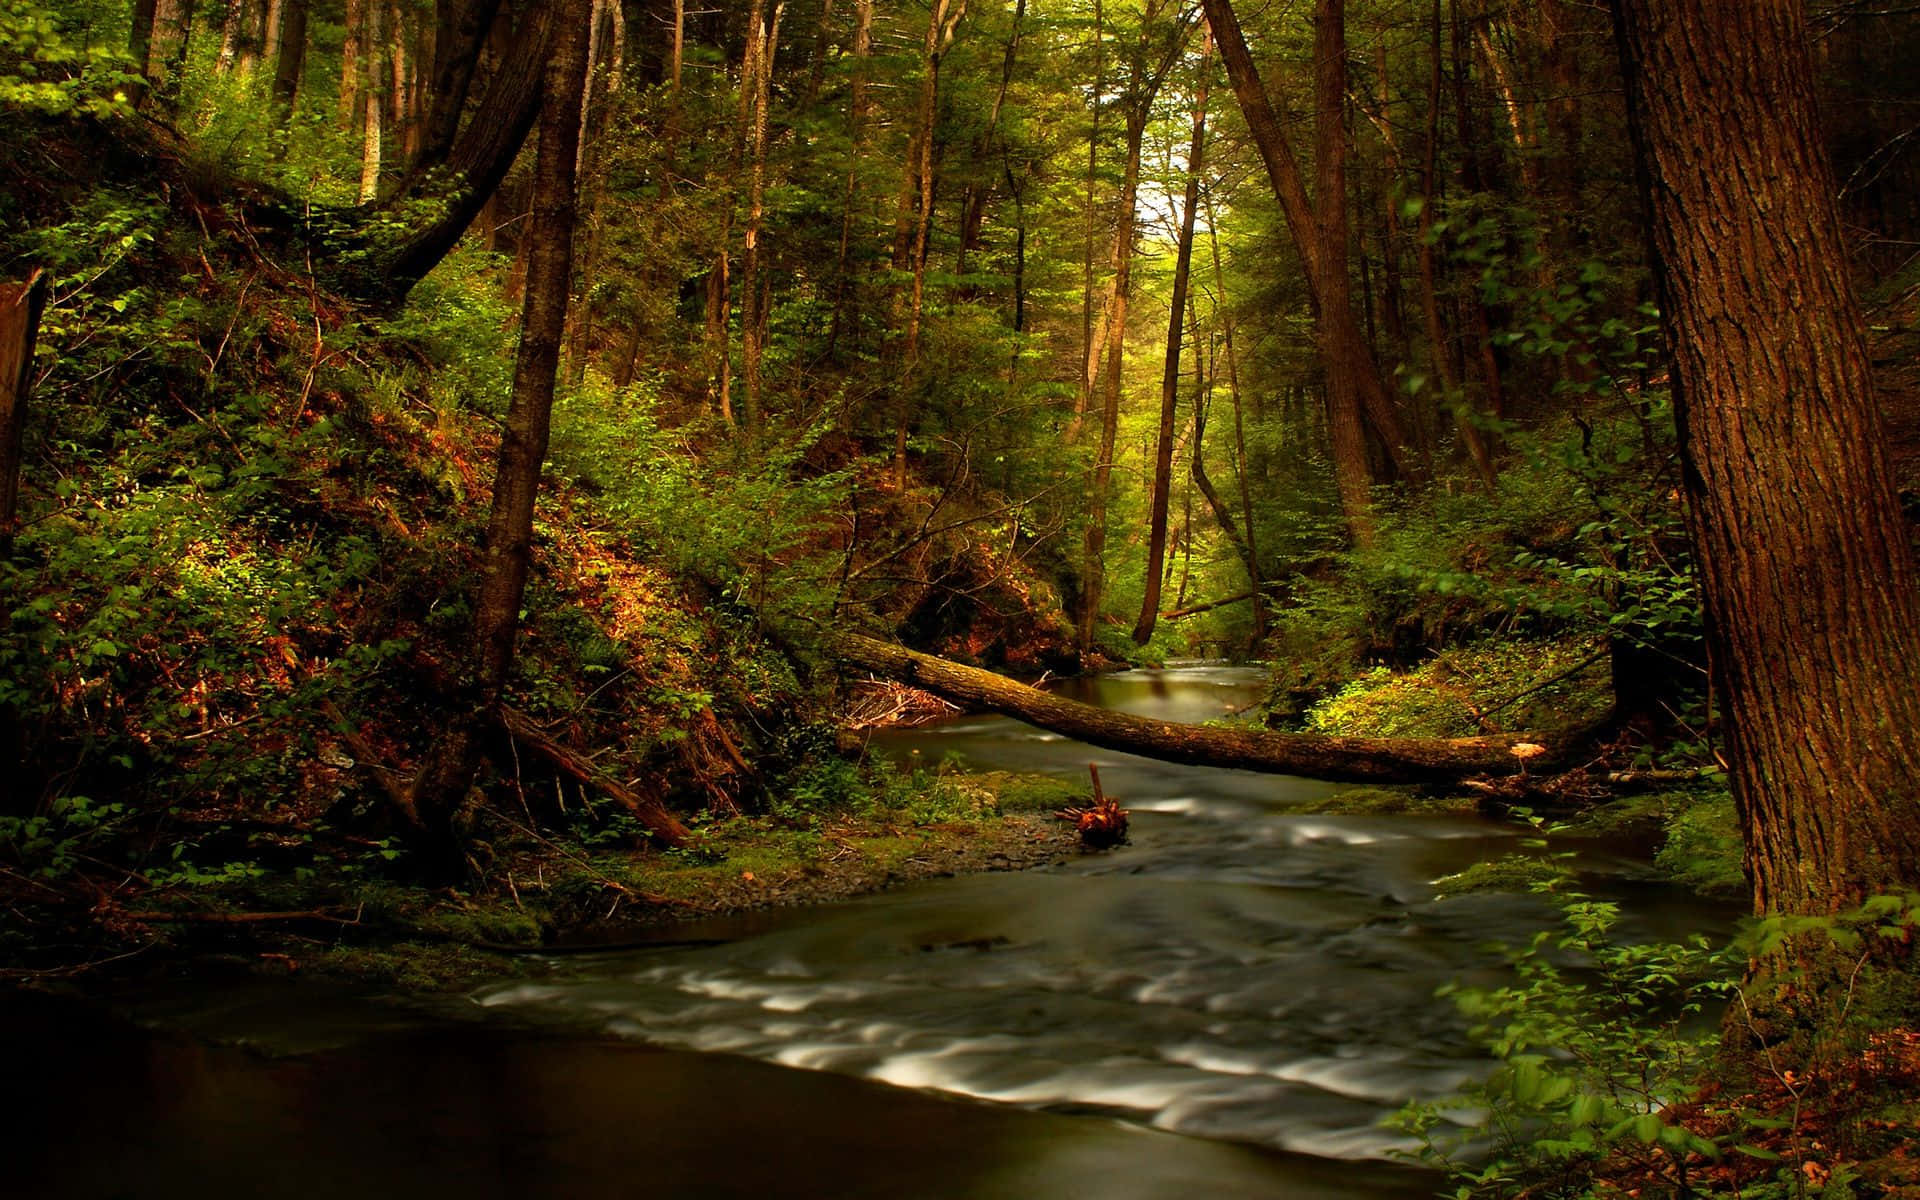 "A picturesque creek winding through a forest"